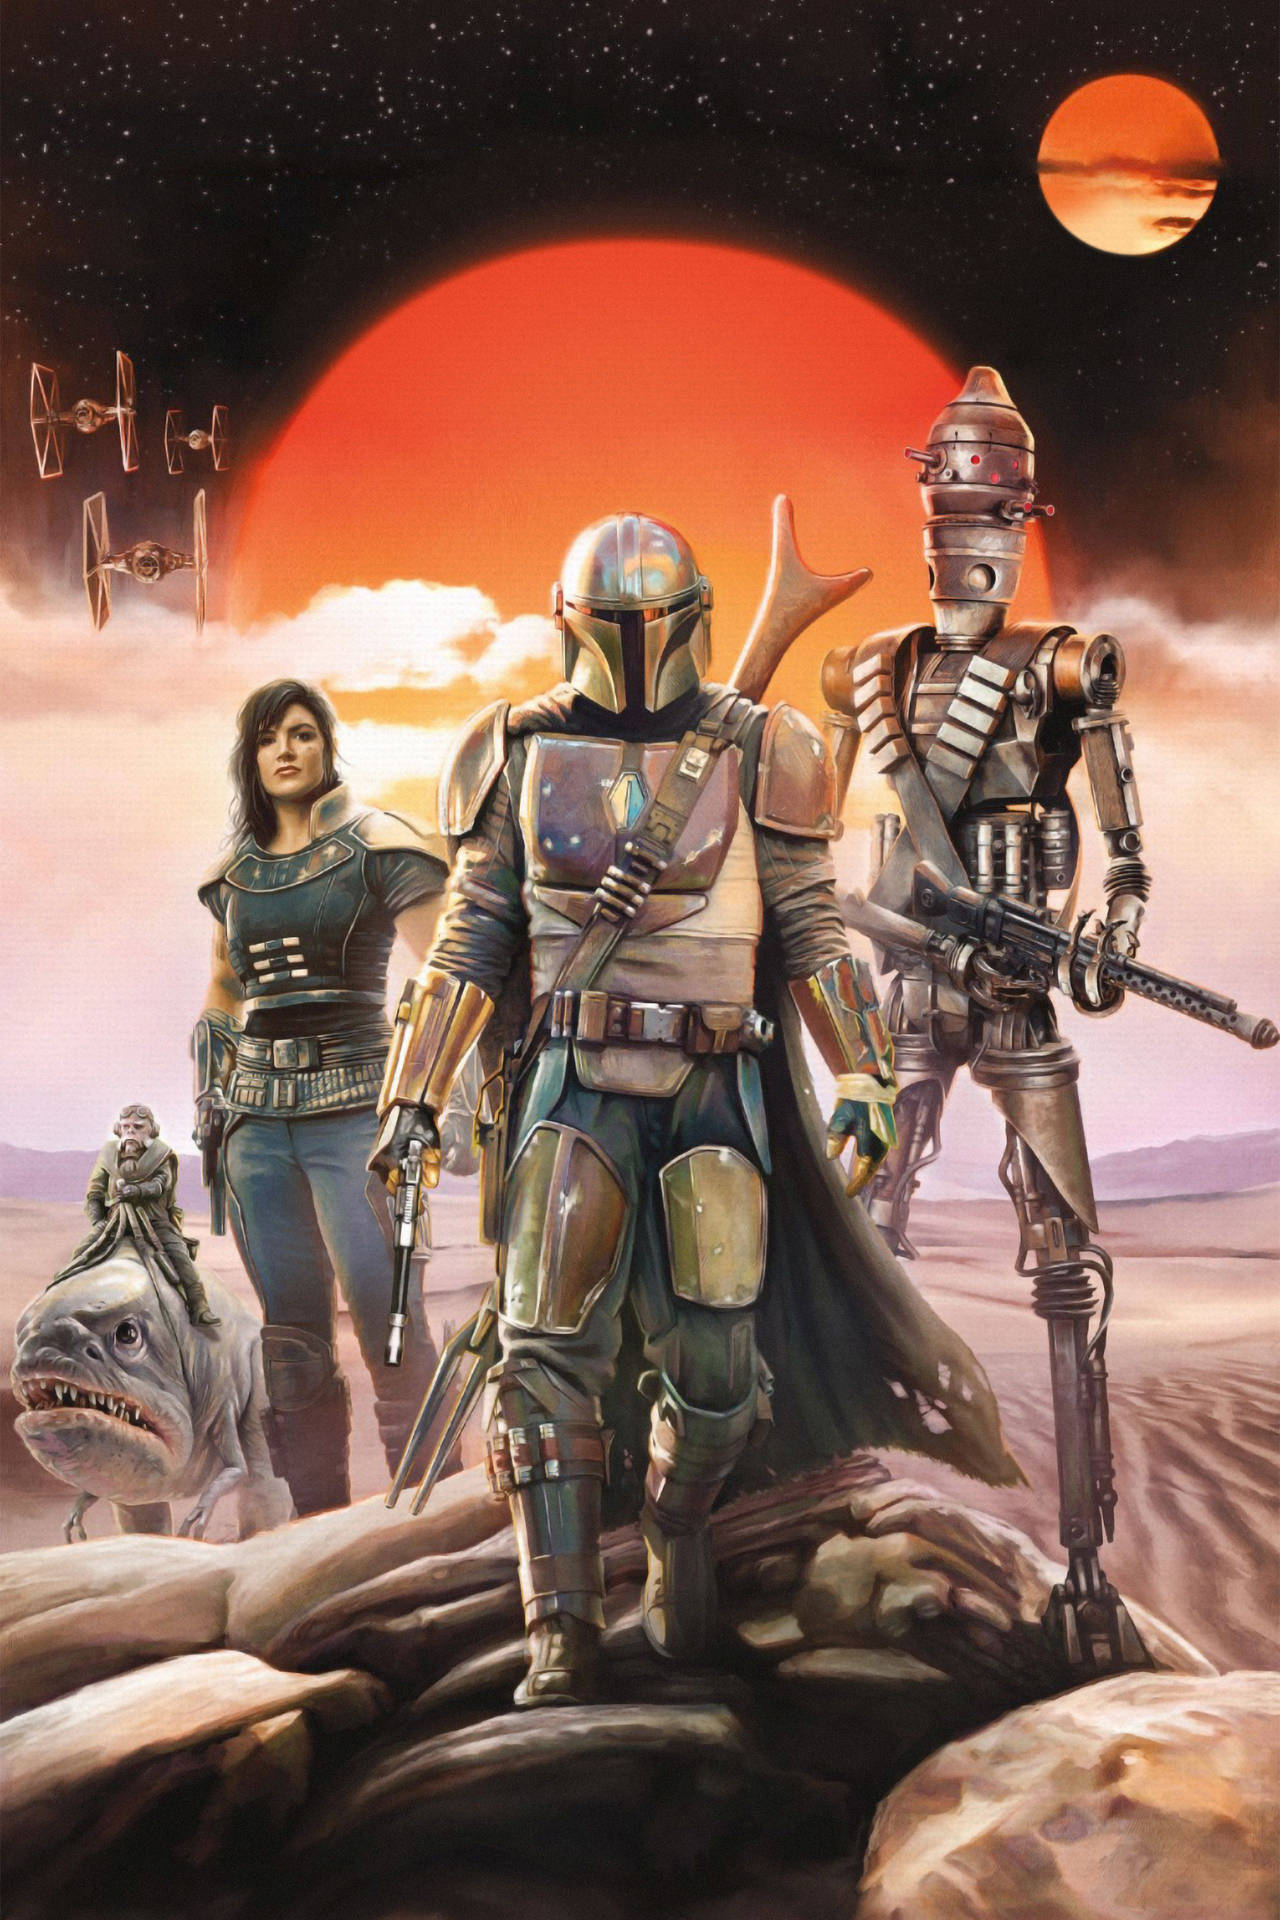 Join the fight for justice in a galaxy far, far away with The Mandalorian. Wallpaper